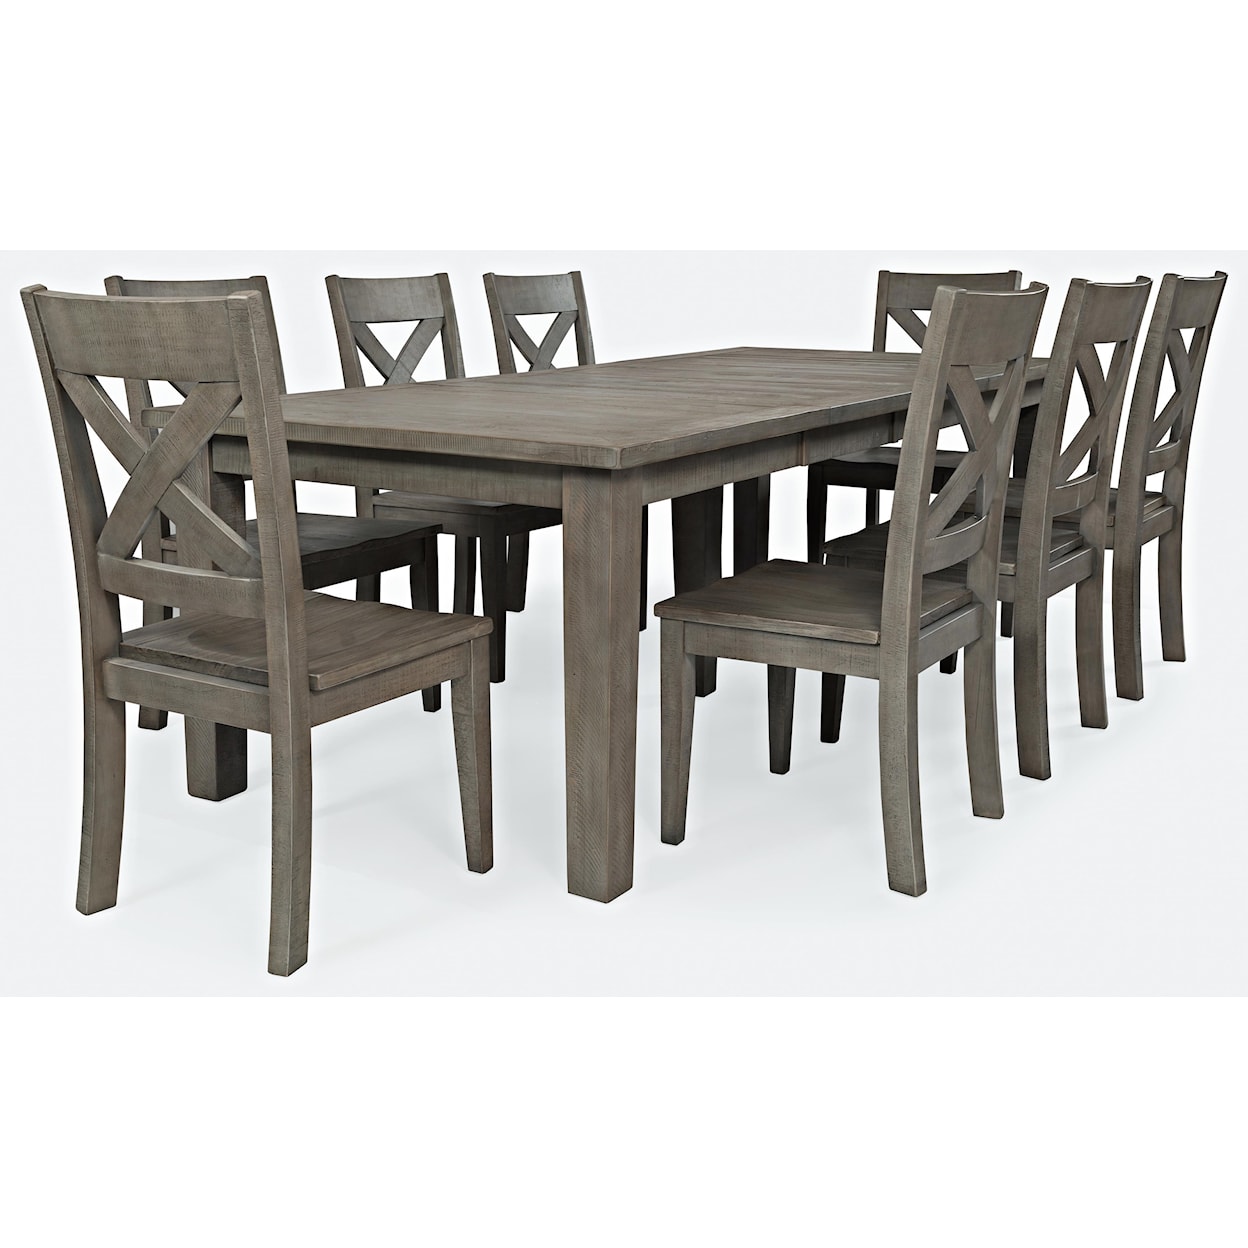 Jofran Outer Banks Table & 8 Chairs